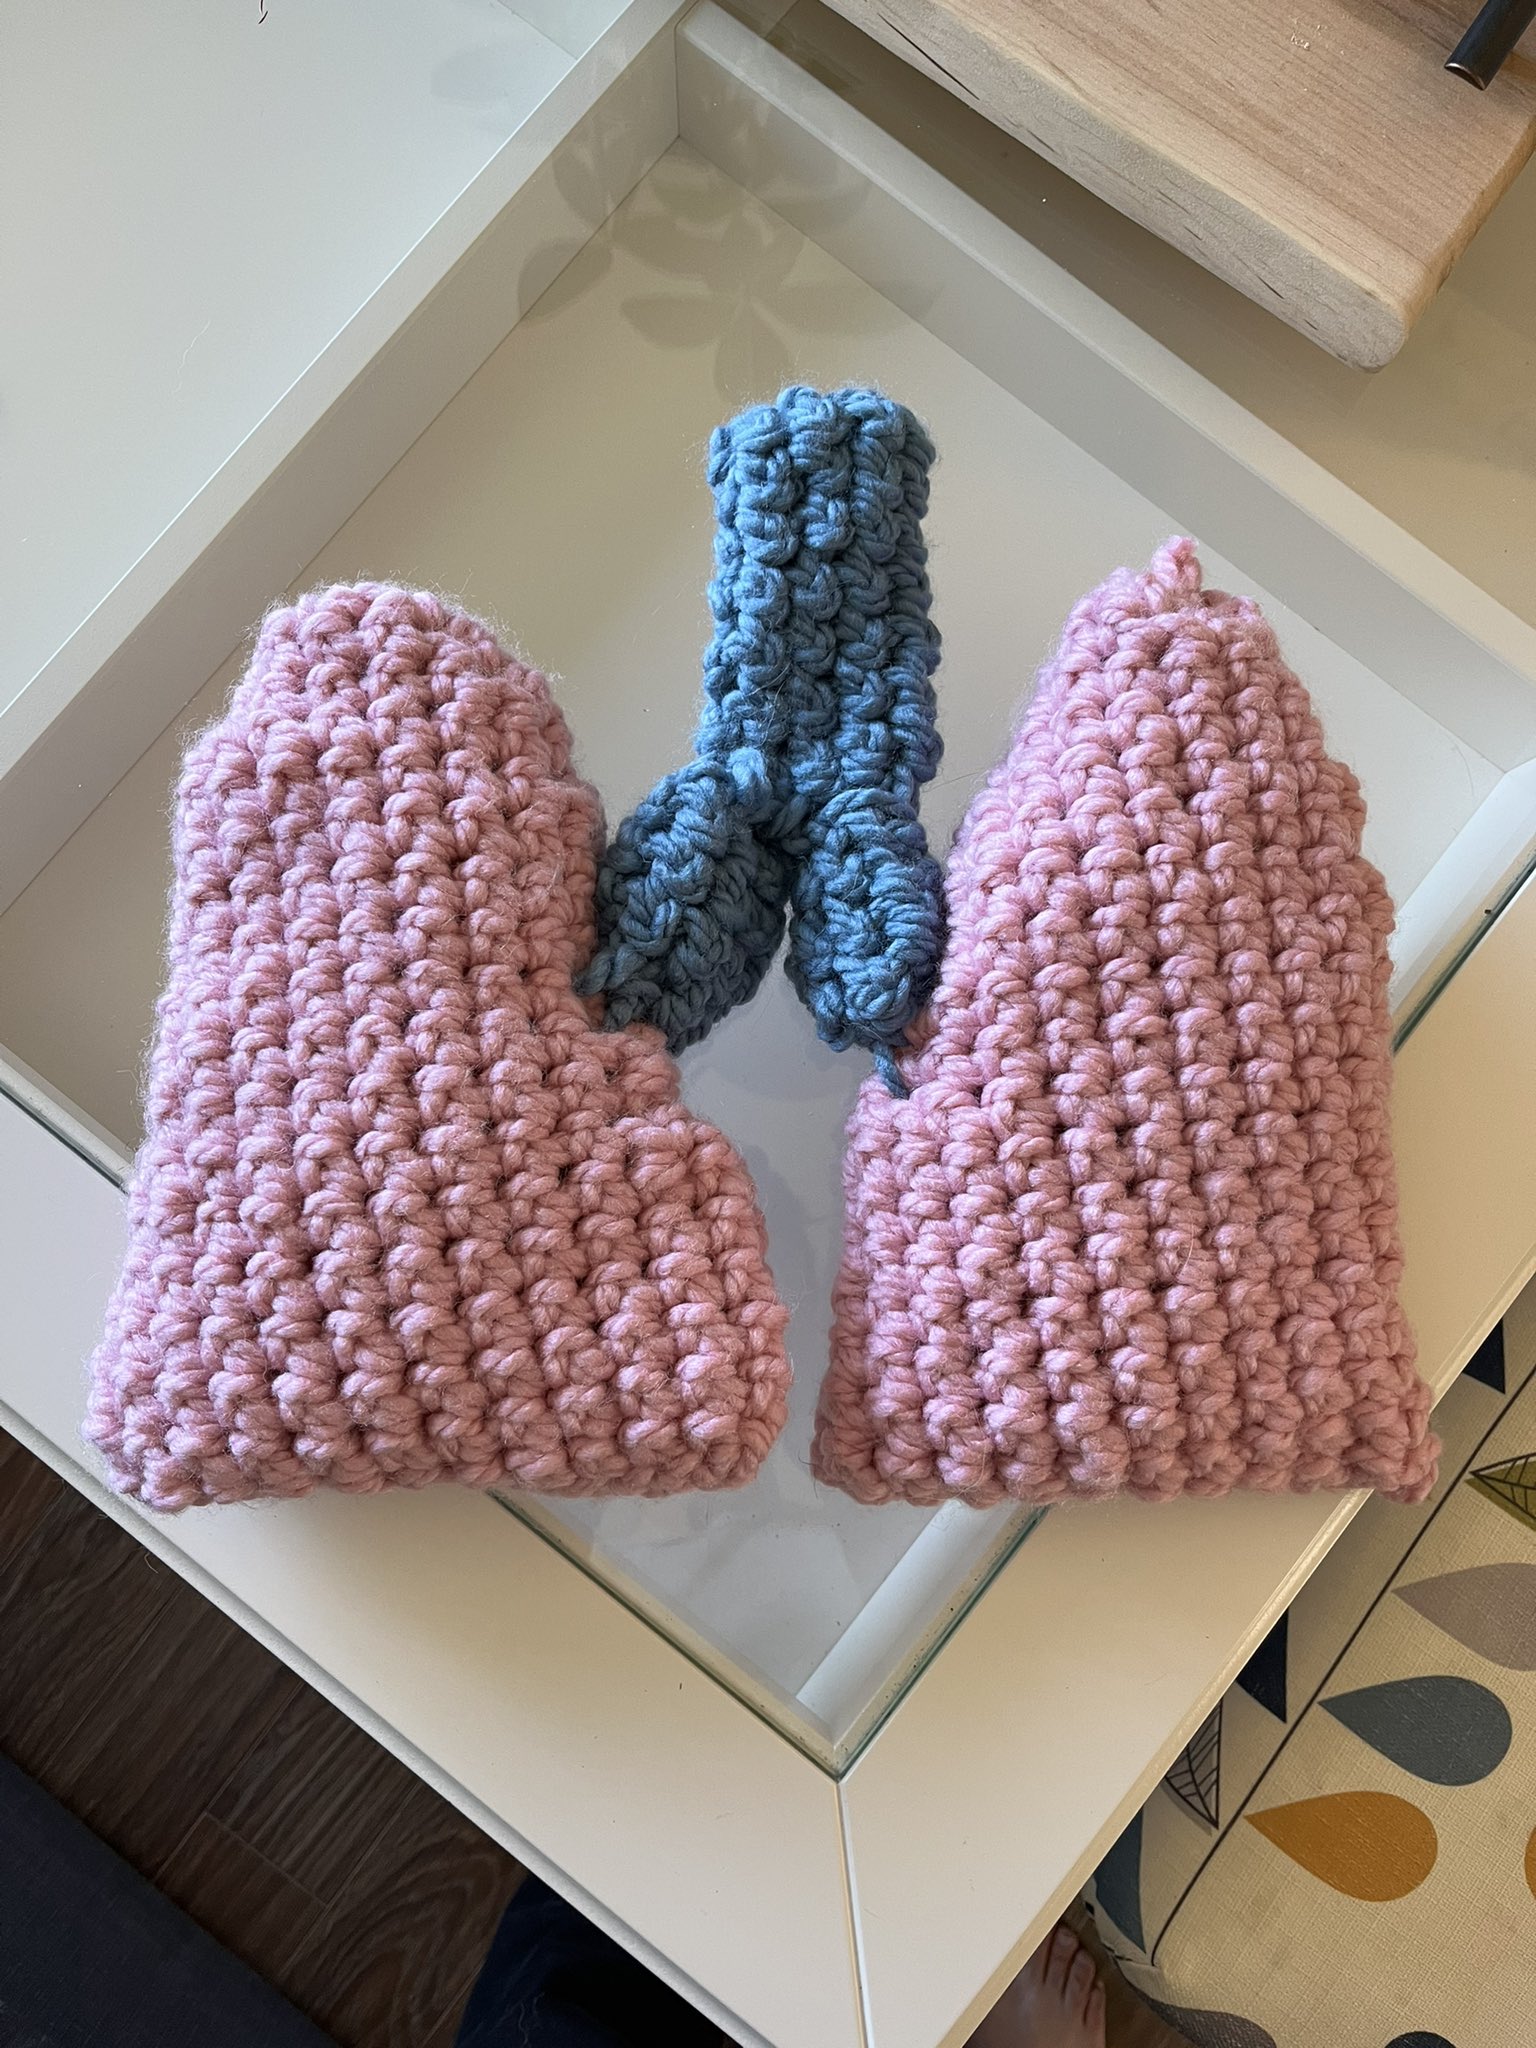 khadija Ibrahim Hancock on X: My classmates started a crochet club & we  are submitting various crochet body parts for the MUN Medicine Annual Art  Gallery this evening. Below is my submission